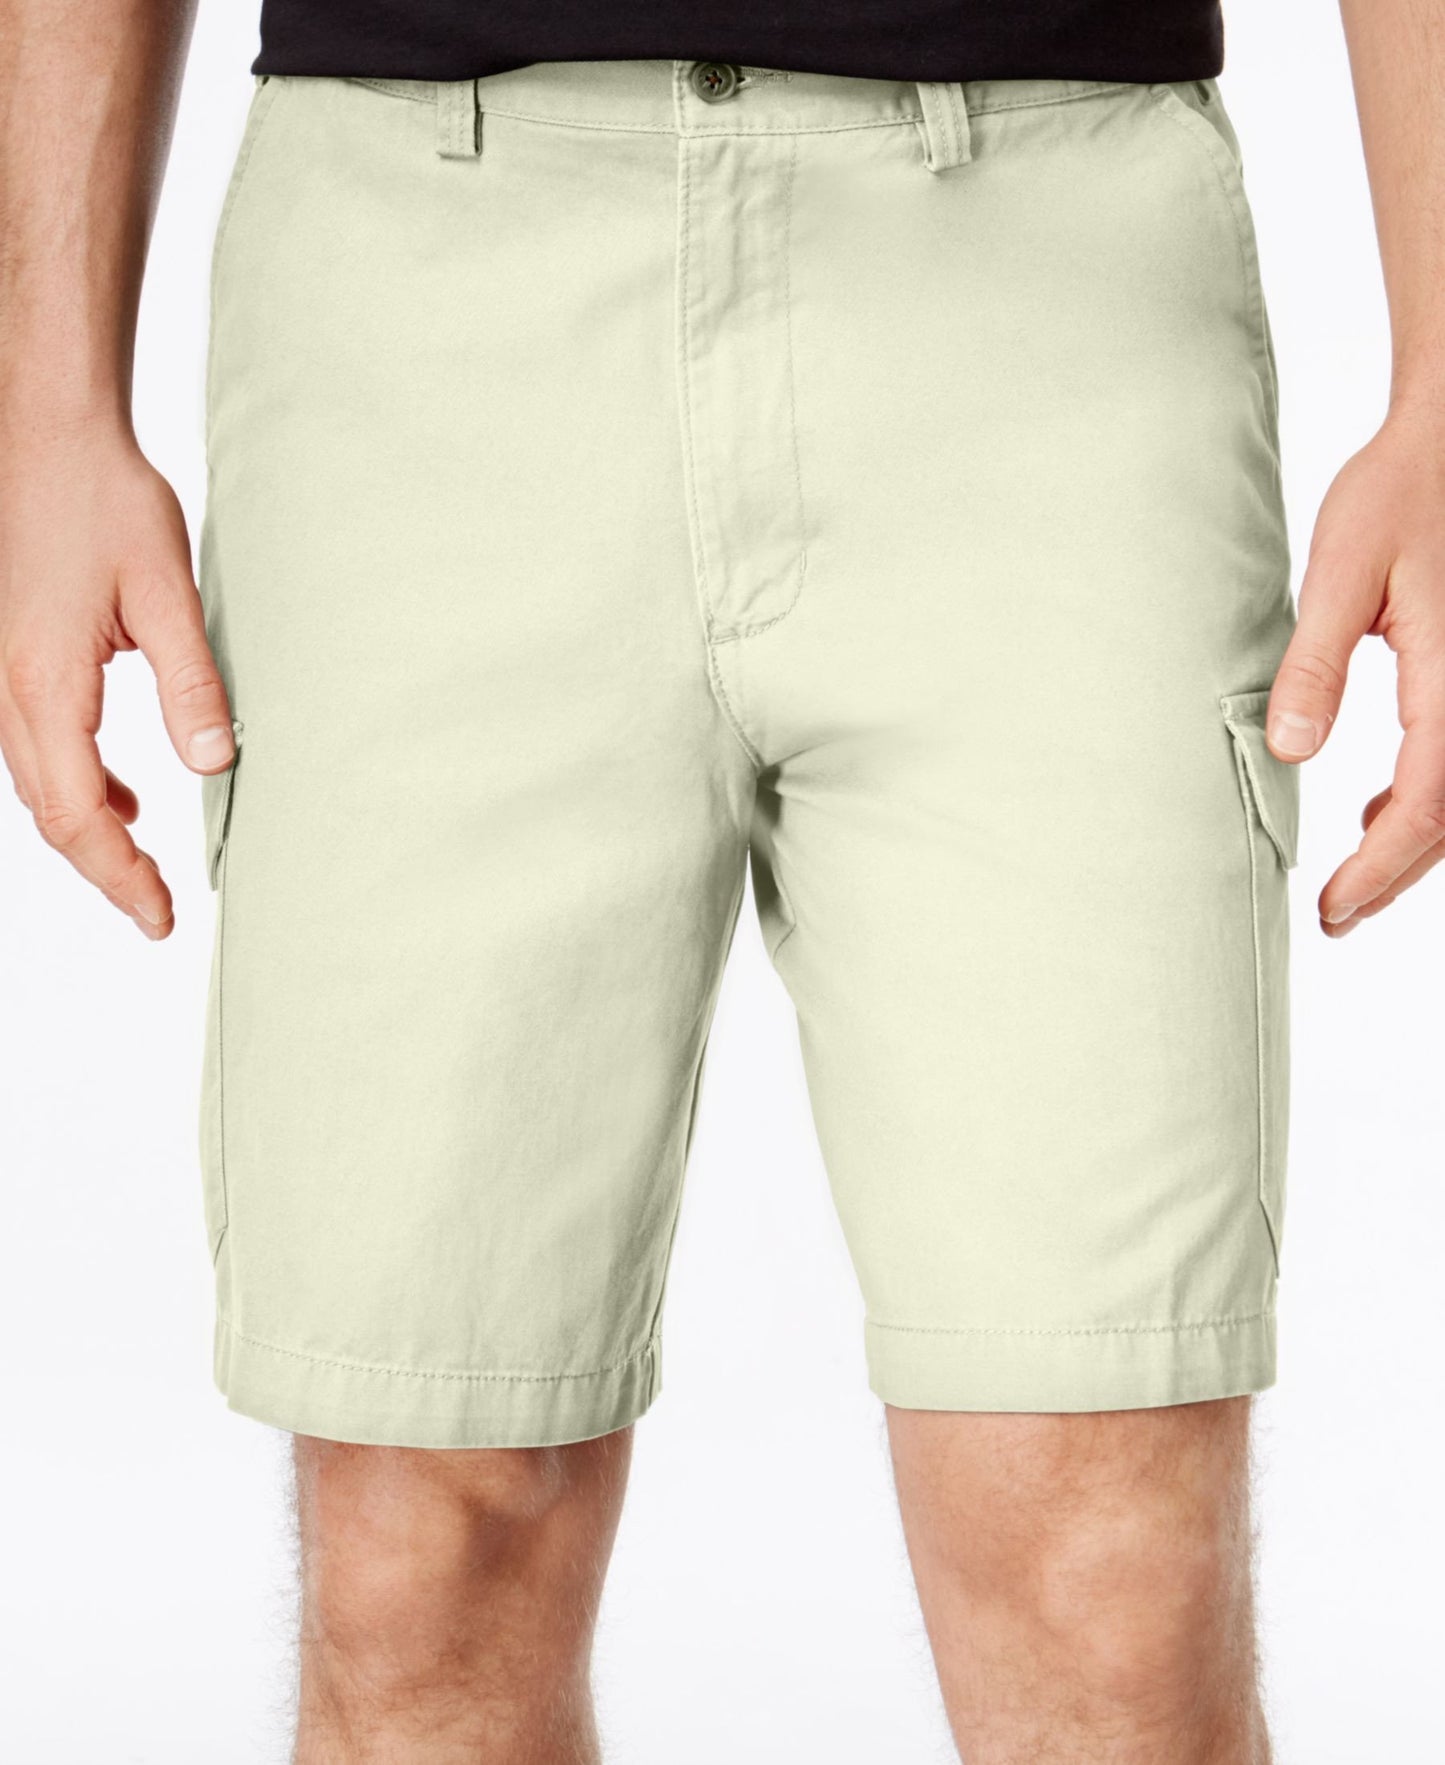 Geoffrey Beene Men's Big and Tall Washed Twill Cargo Short